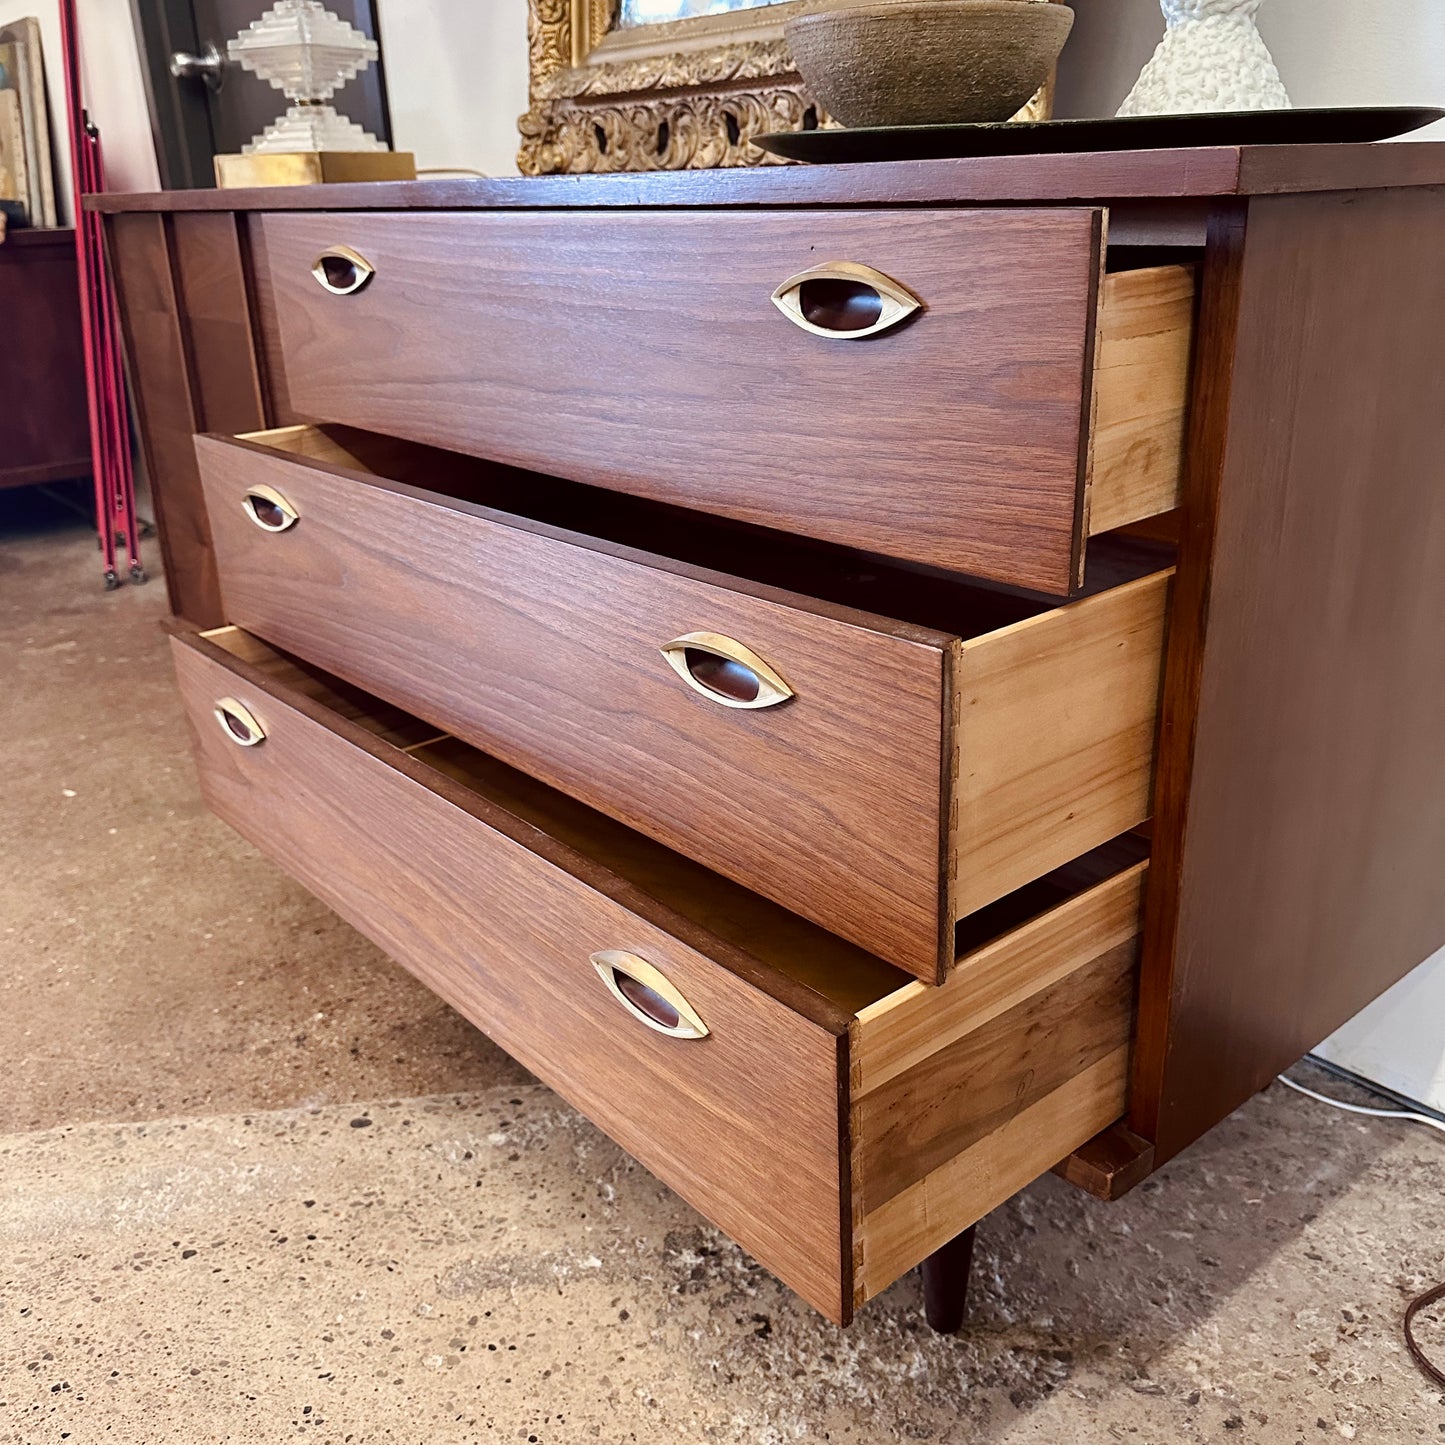 WALNUT BYPASS DOOR CREDENZA WITH DRAWERS